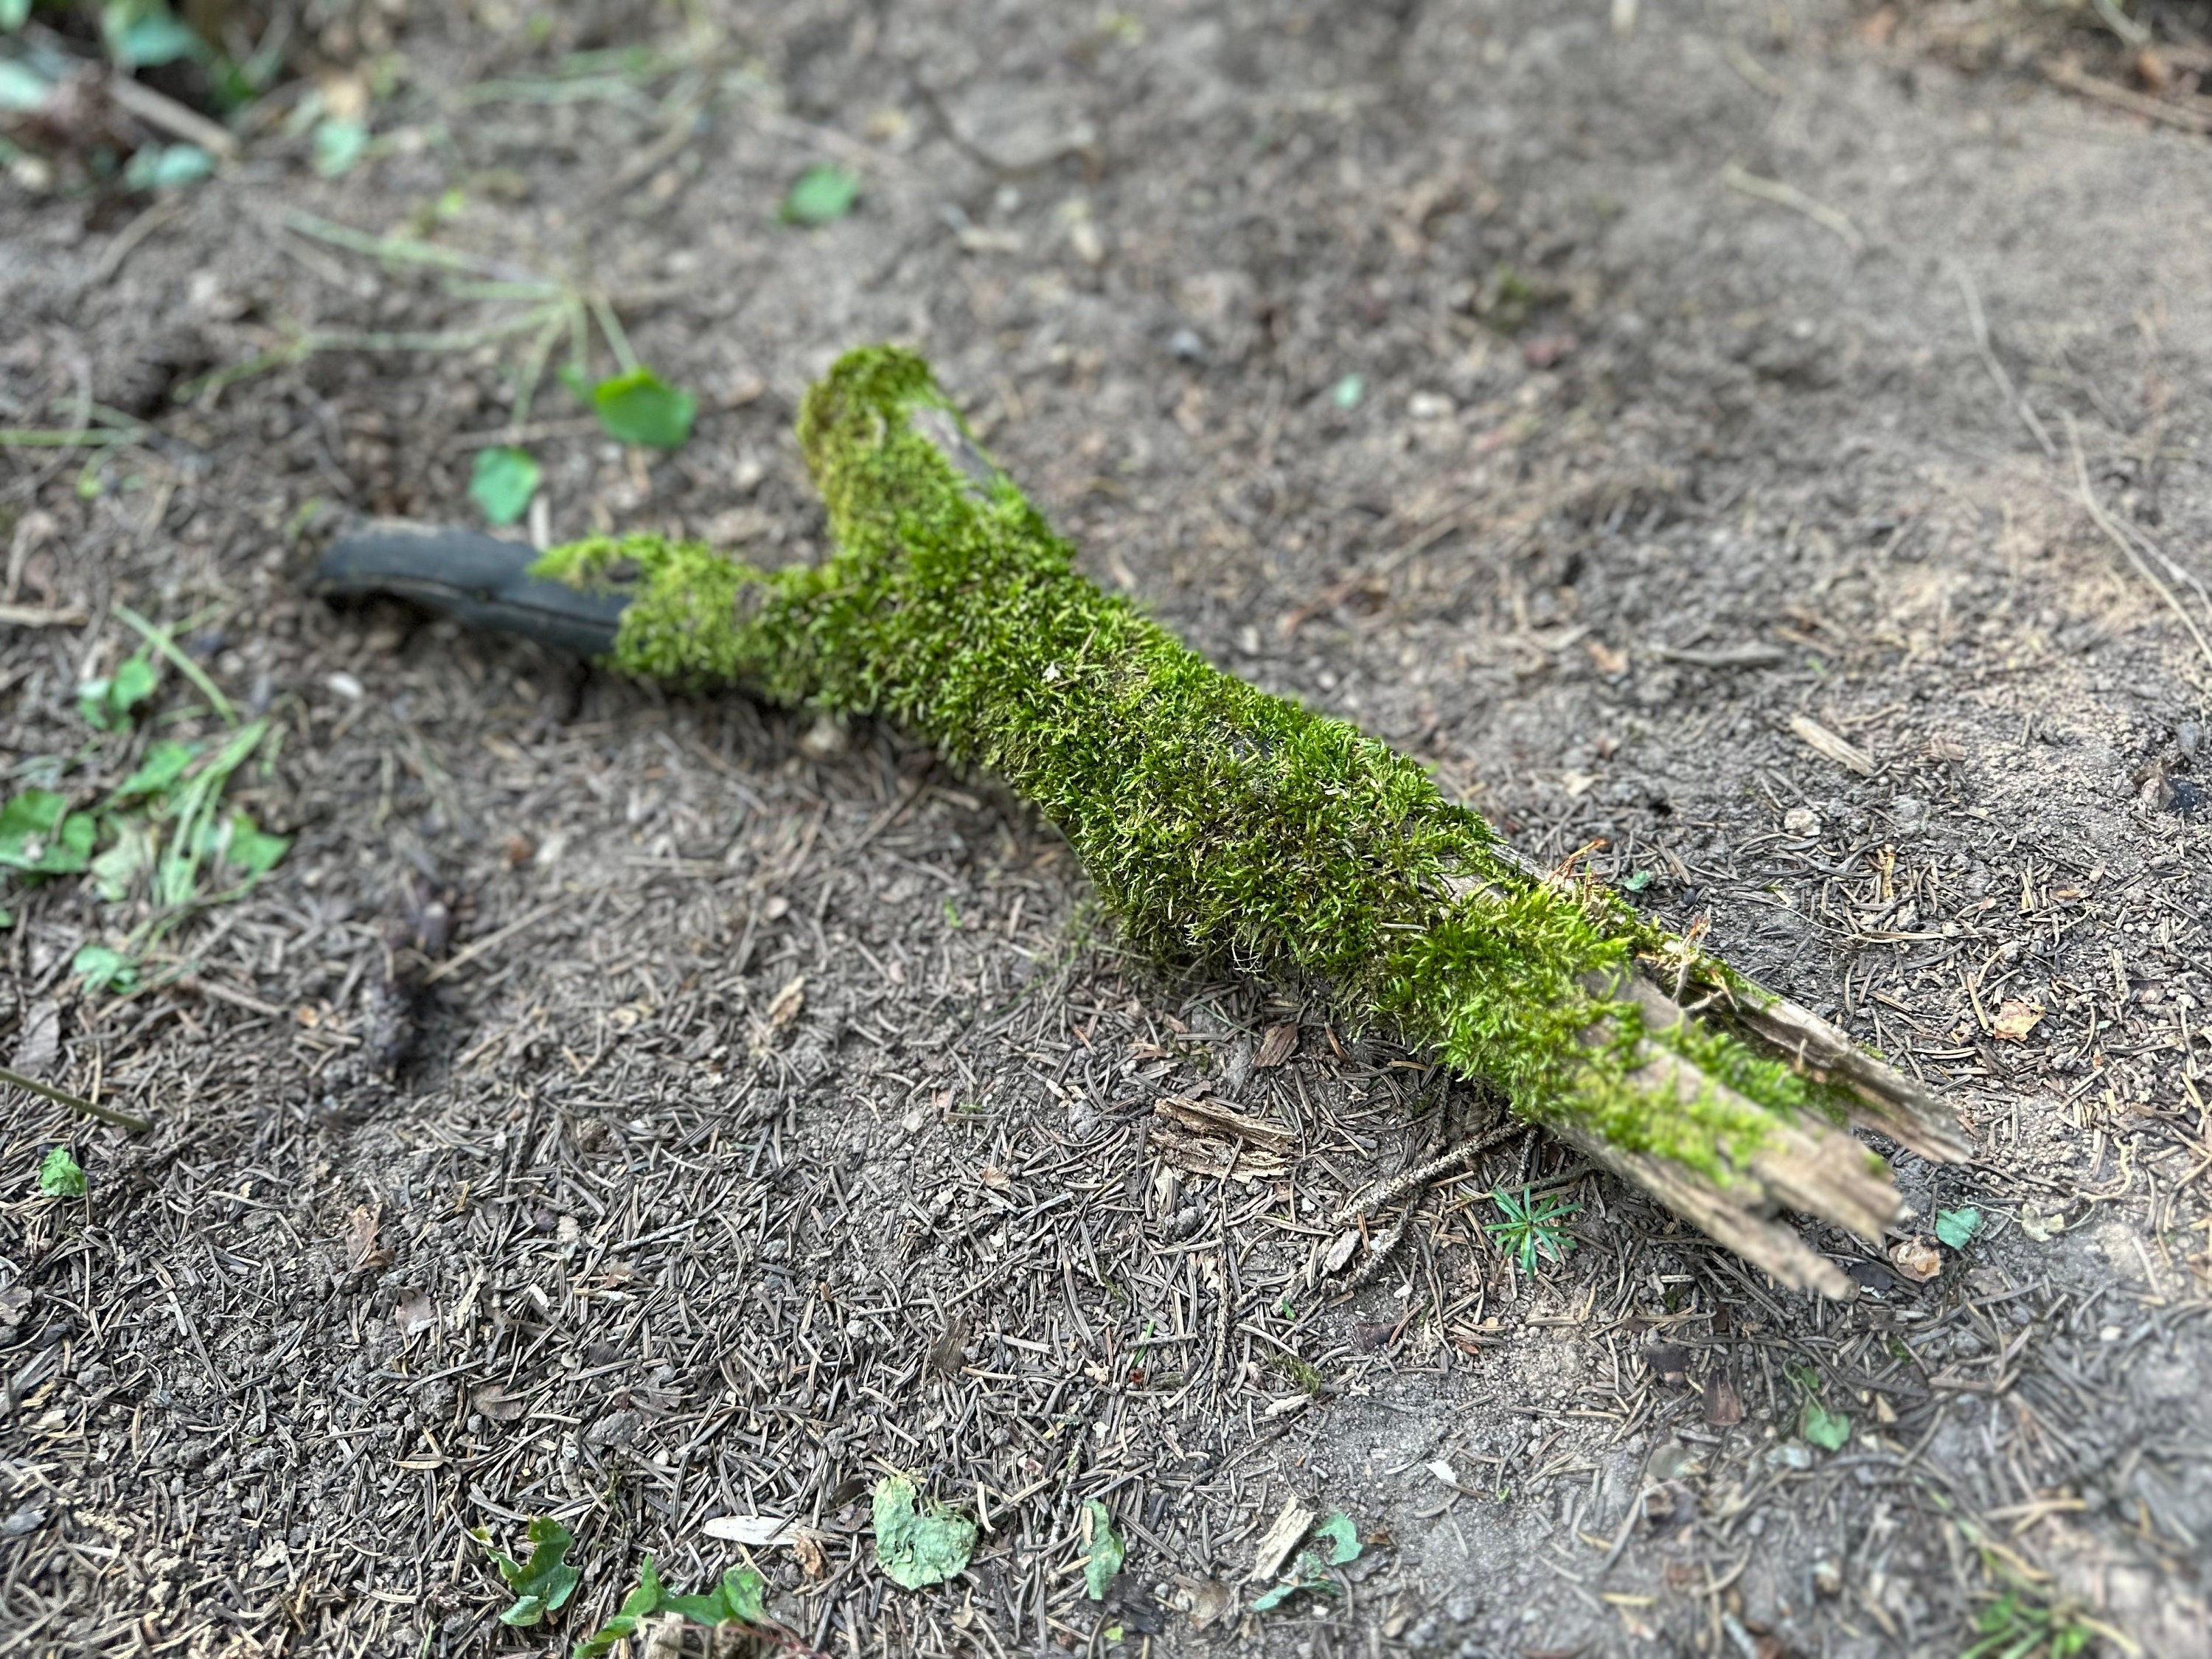 Mossy Log, Real Moss Covered Log, 16.5 Inches Long by 2 Inches Wide and 1.5 Inches High